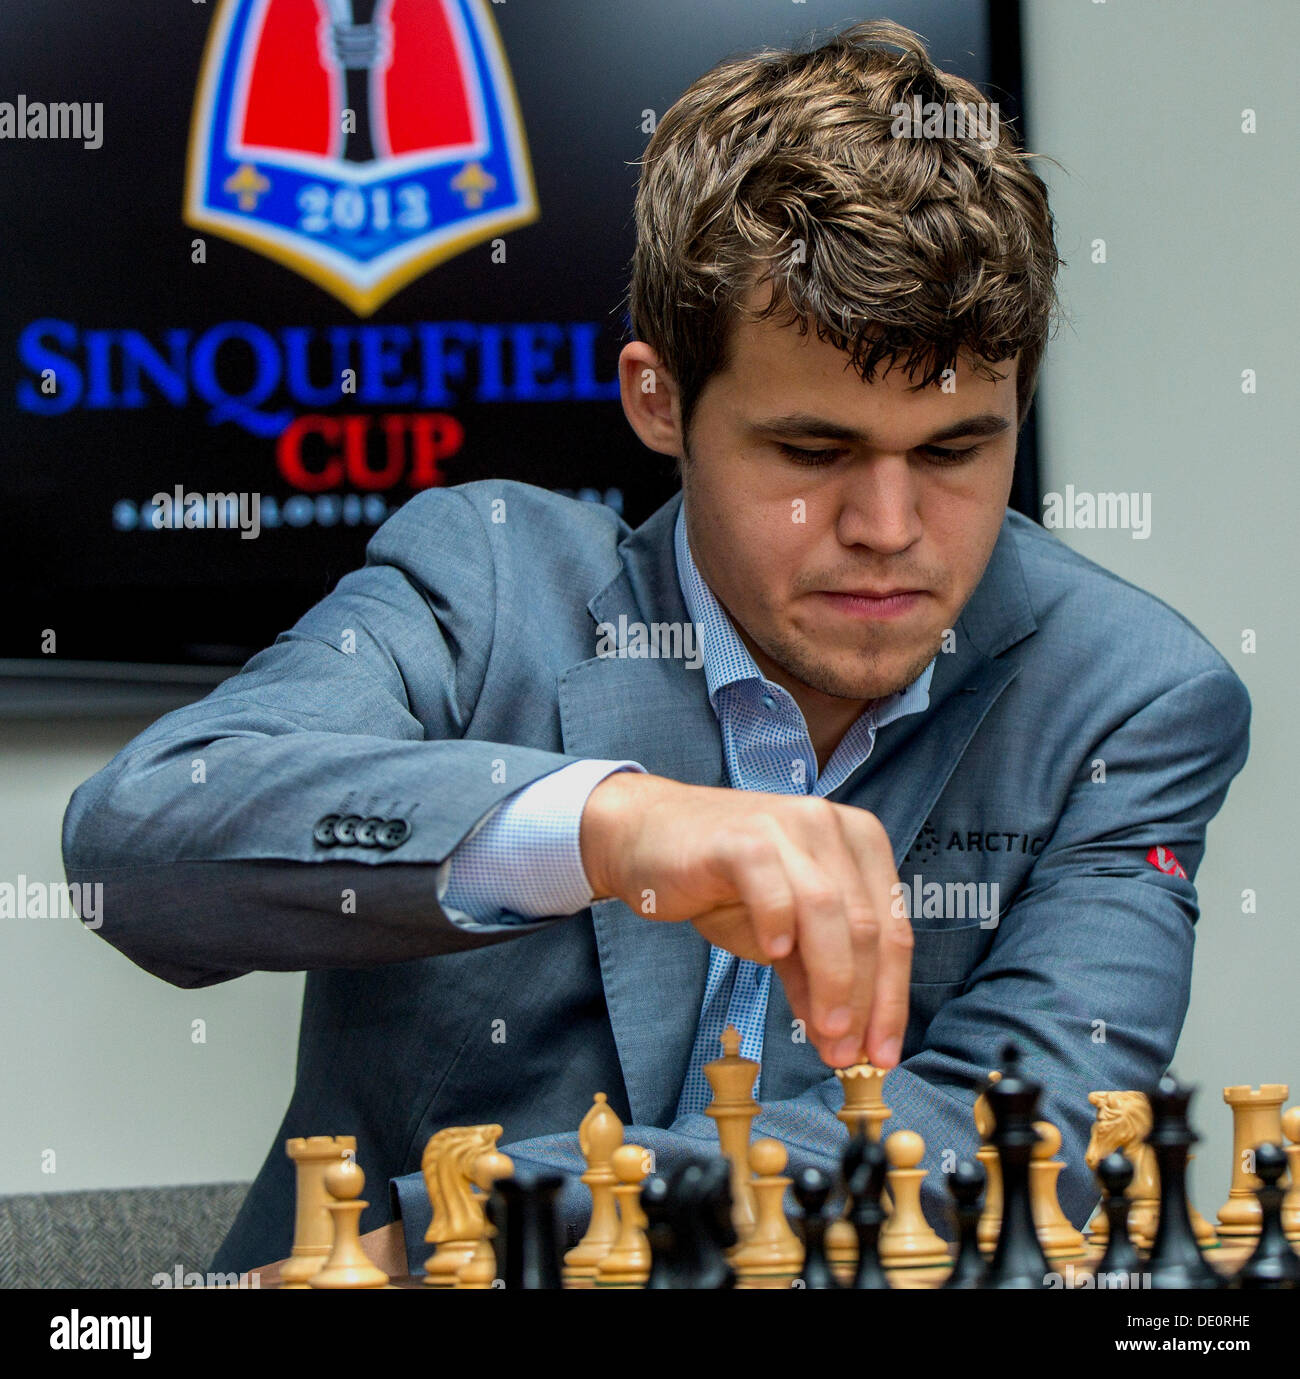 World Chess Championship 2013: Carlsen and Anand presented with medals